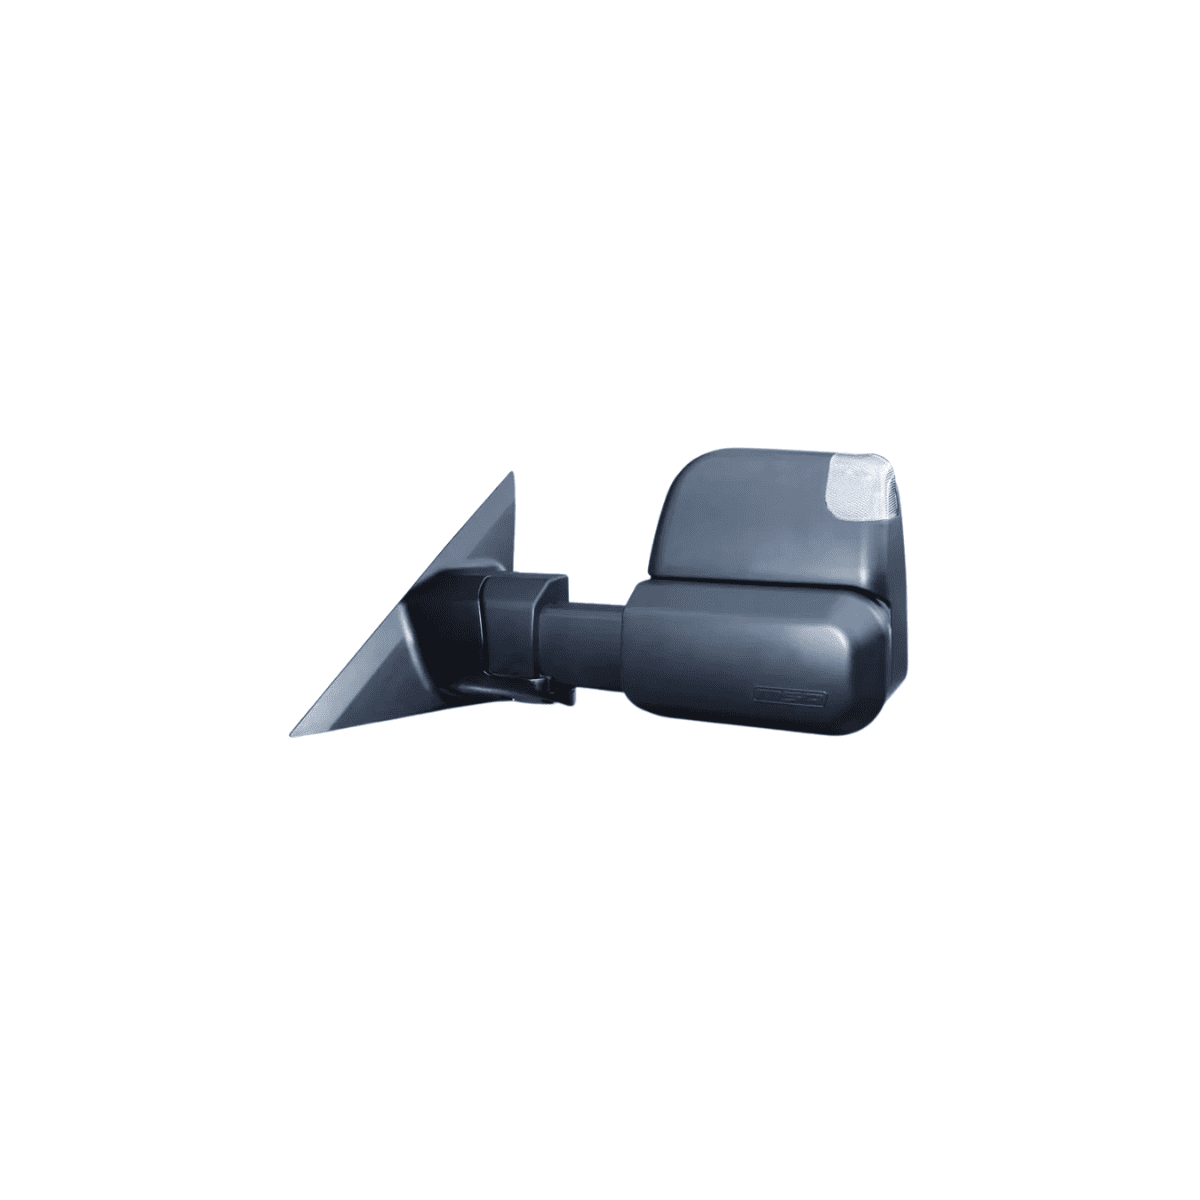 LC200 TOWING MIRRORS (Black, Indicators, Blind Spot Monitoring) 2007 – CURRENT